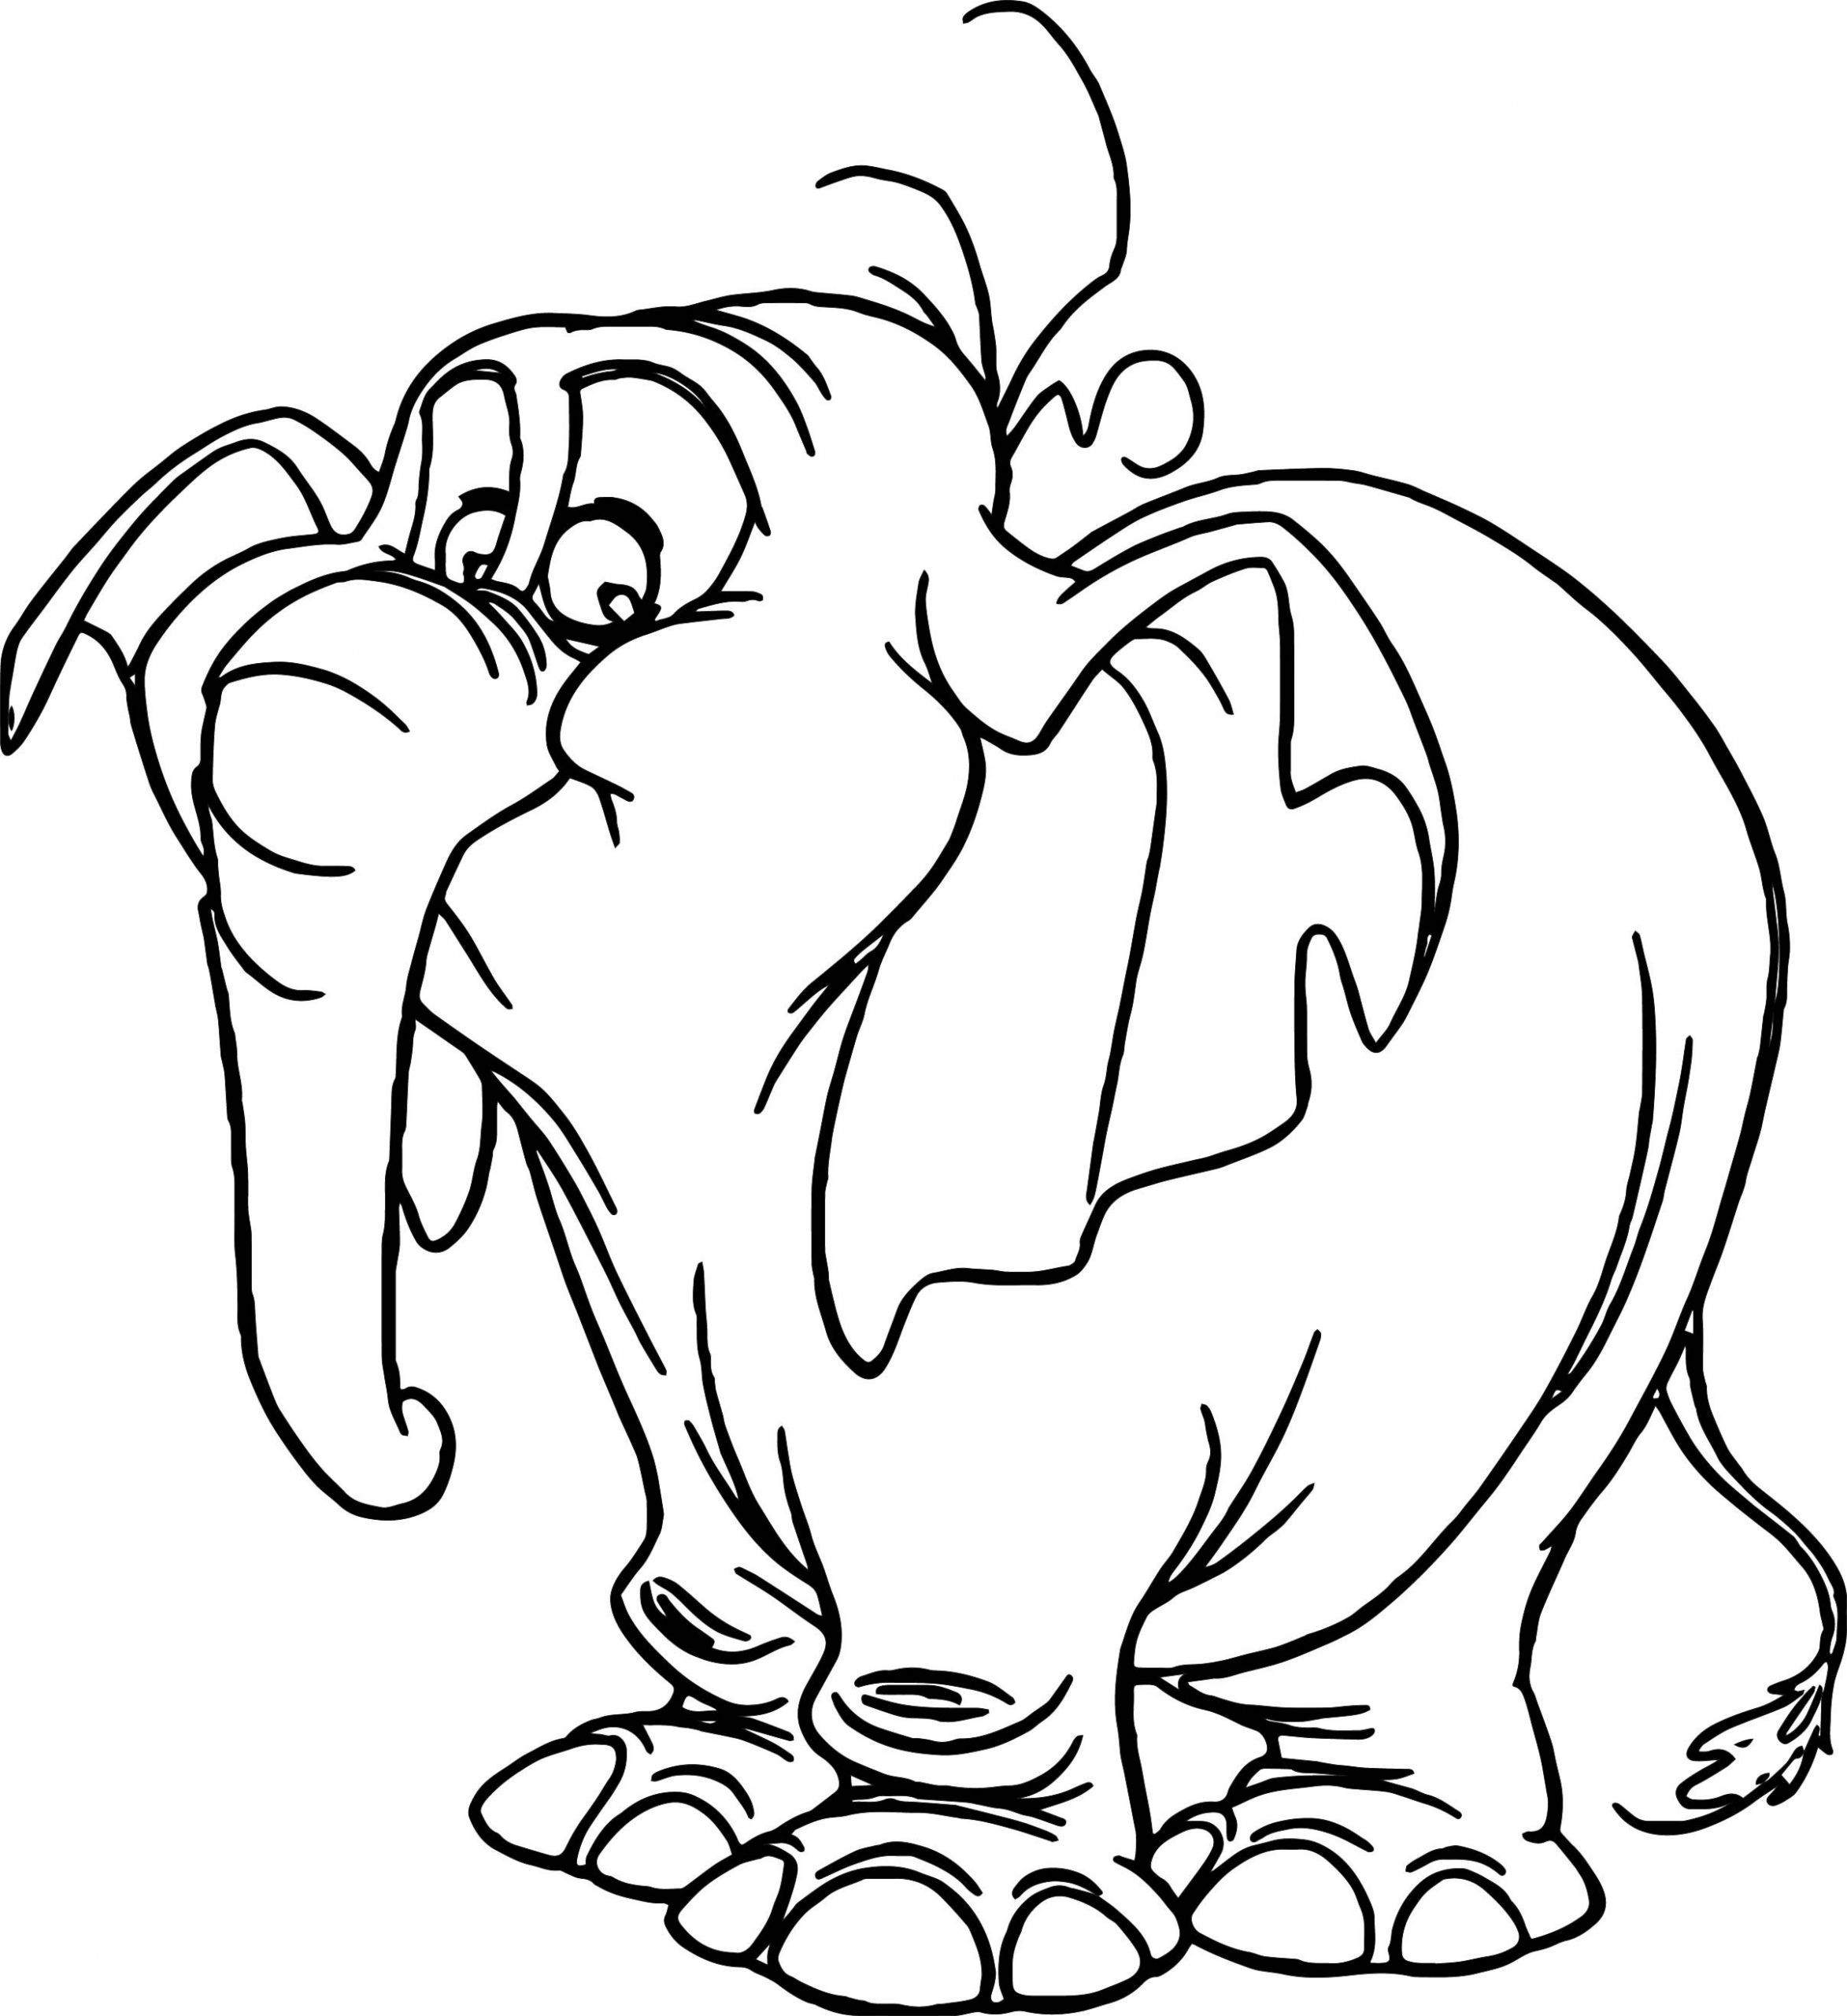 The 21 Best Ideas for Cute Baby Elephant Coloring Pages - Home, Family